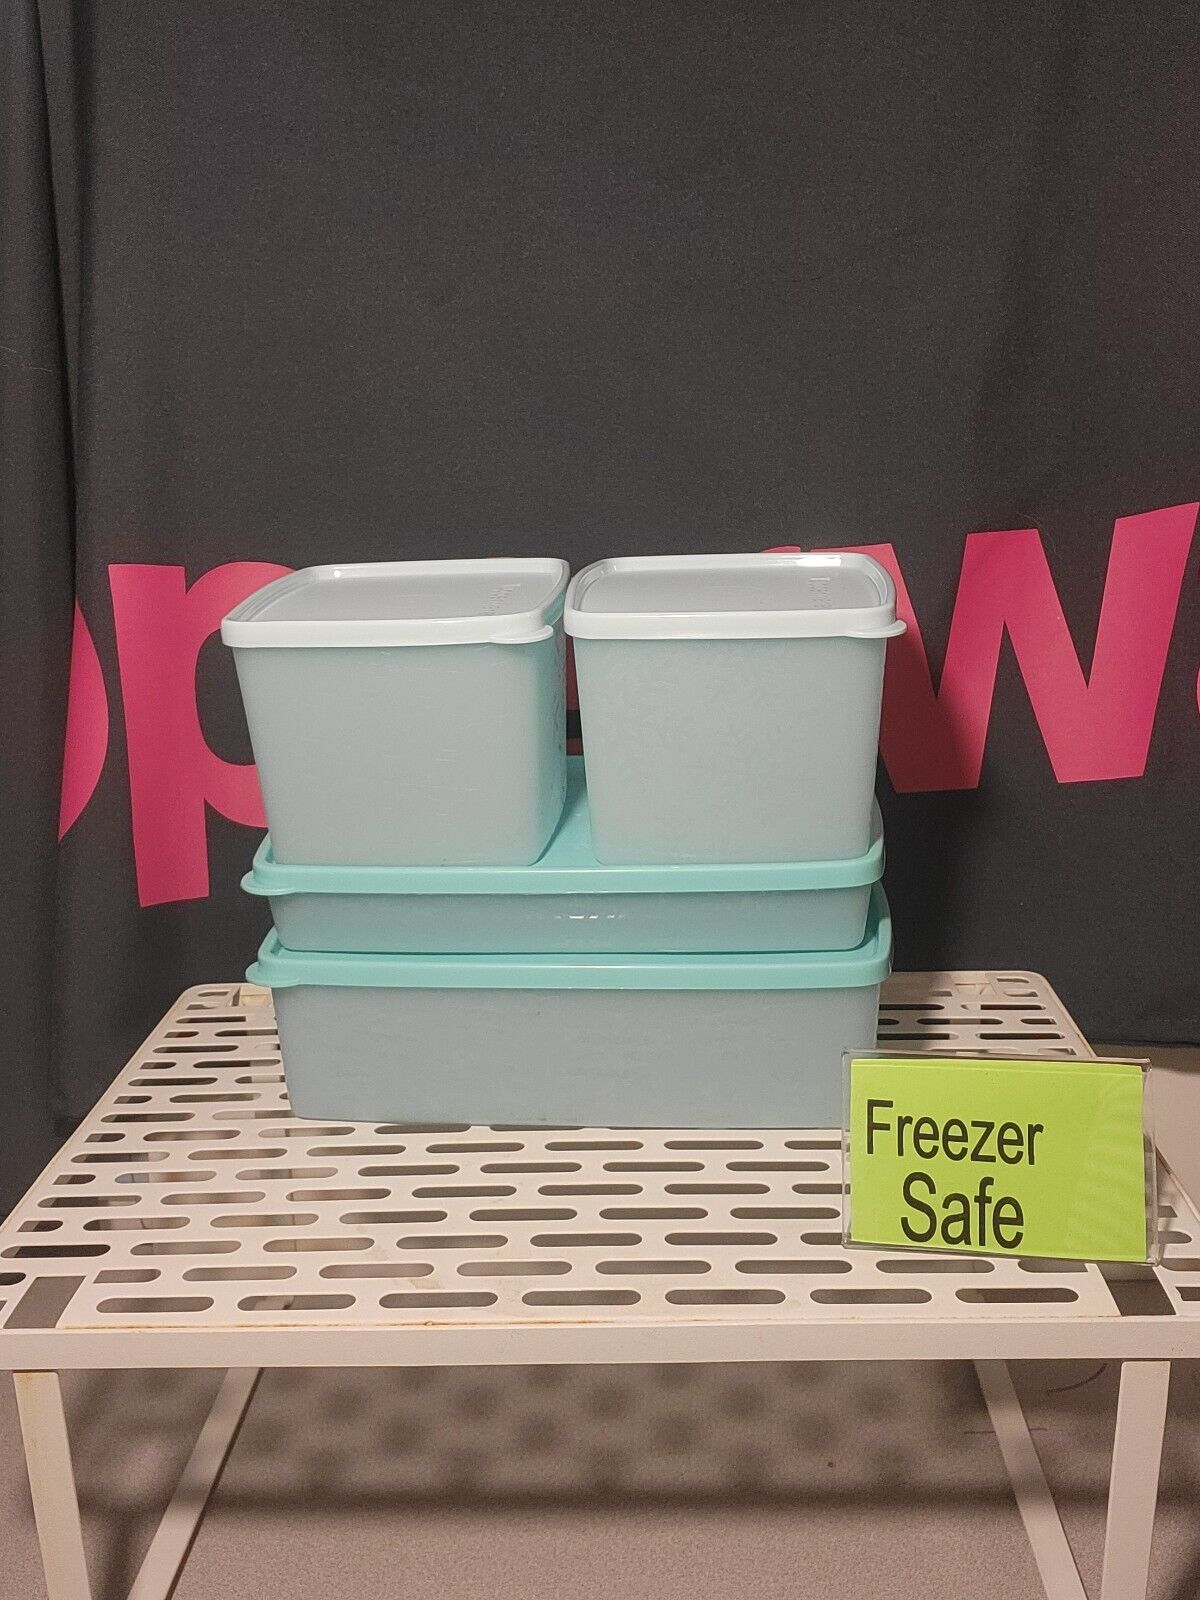 Tupperware Freezer Containers Set of 4 Teal Lids - NEW